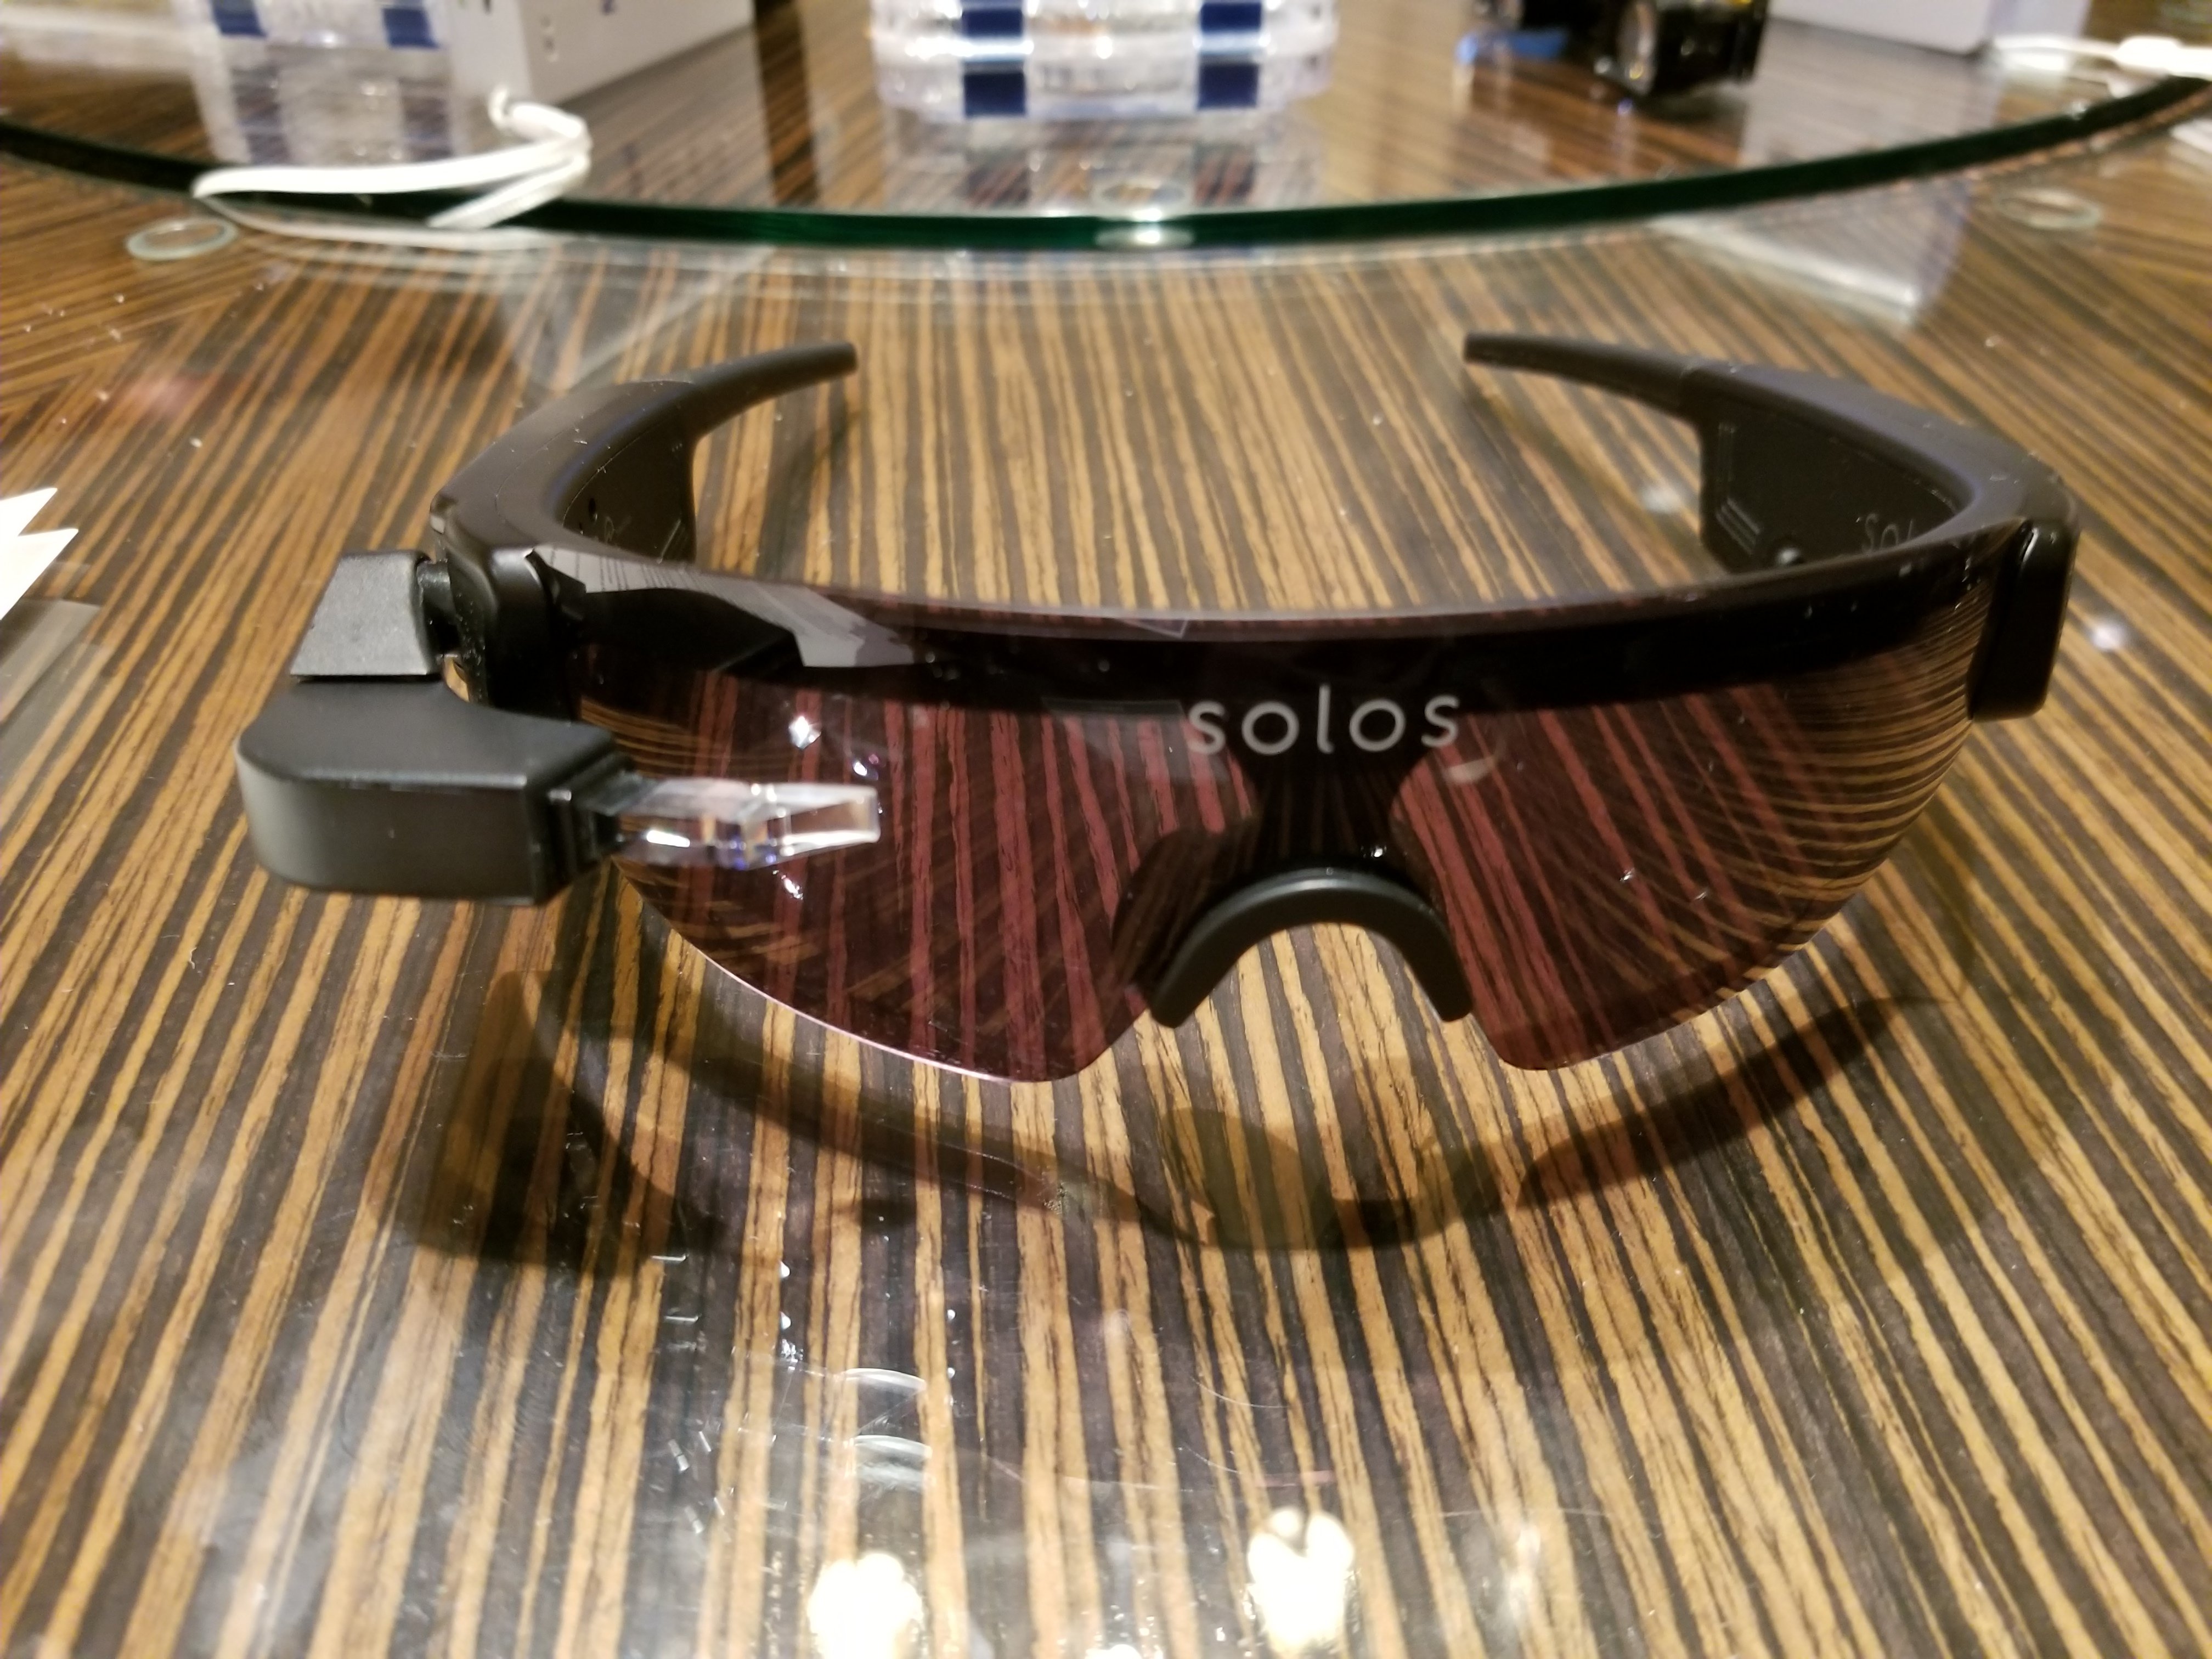 These smart glasses are on display at CES 2018.